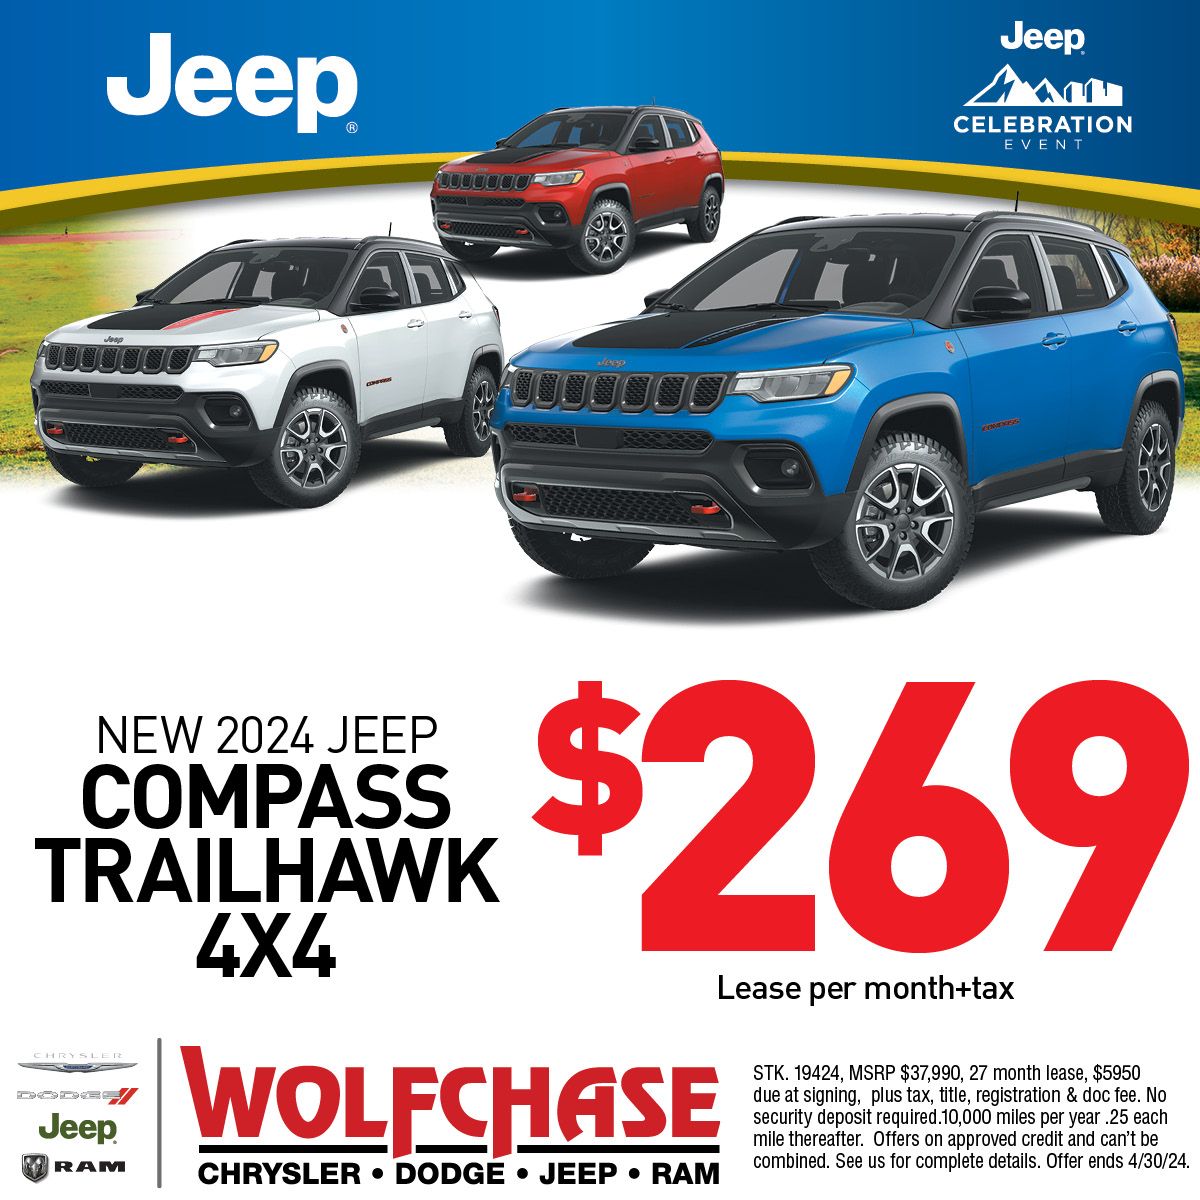 Lease a NEW 2024 Jeep Compass Trailhawk 4x4 for only $269/mo for 27 months! 
Check out our Trailhawks here: wolfchasecdj.com/searchnew.aspx… 

#JeepCompass #Jeep #WolfchaseCDJR #JeepLease